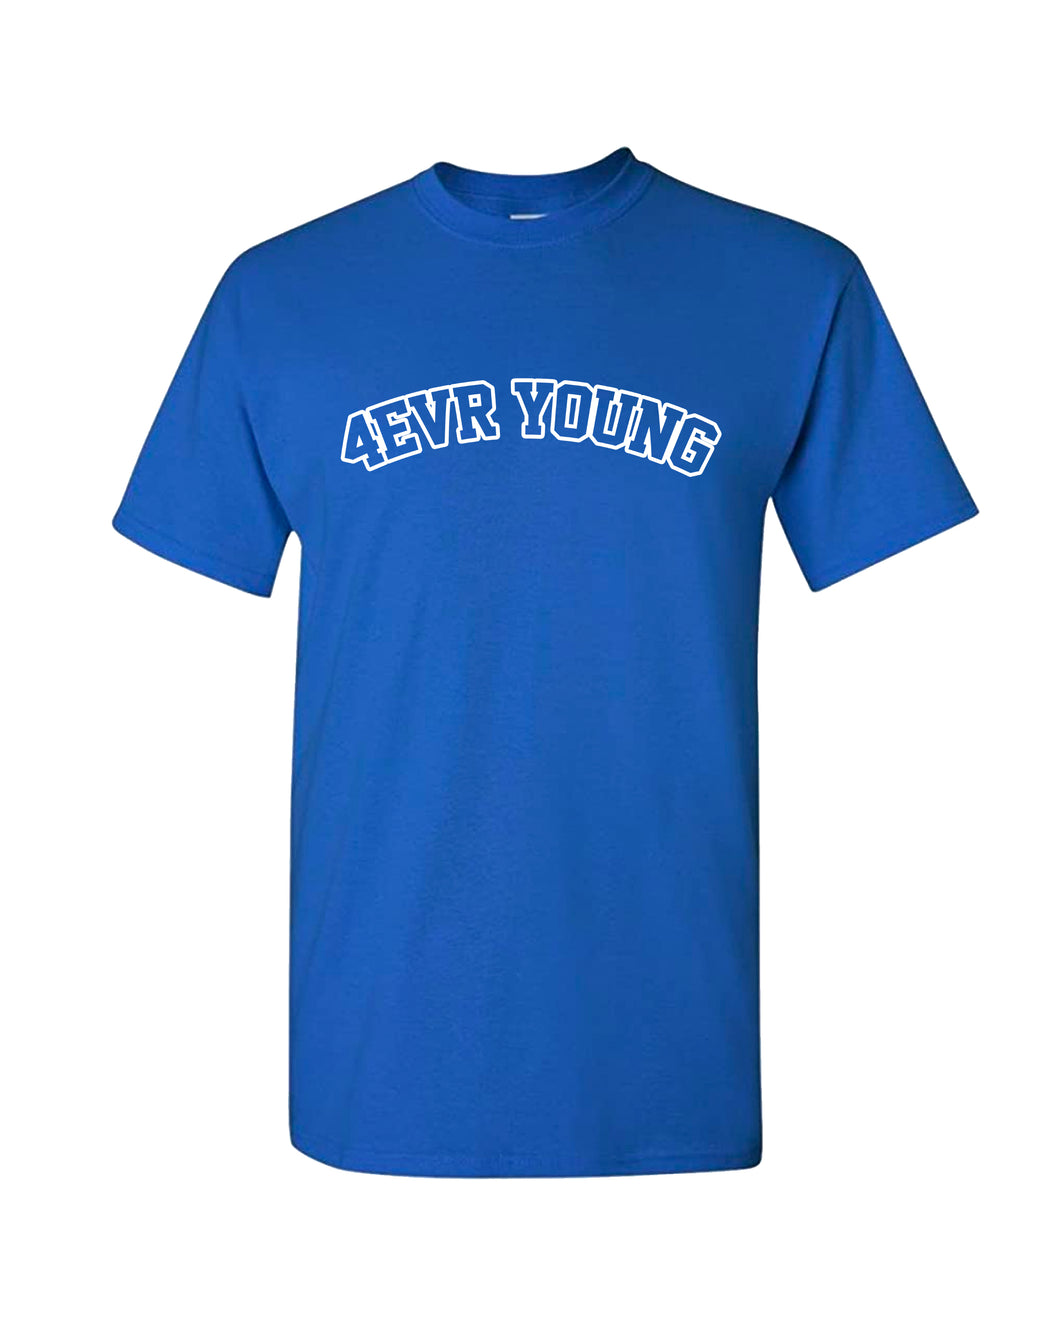 4EVR YOUNG University Royal Blue Tee